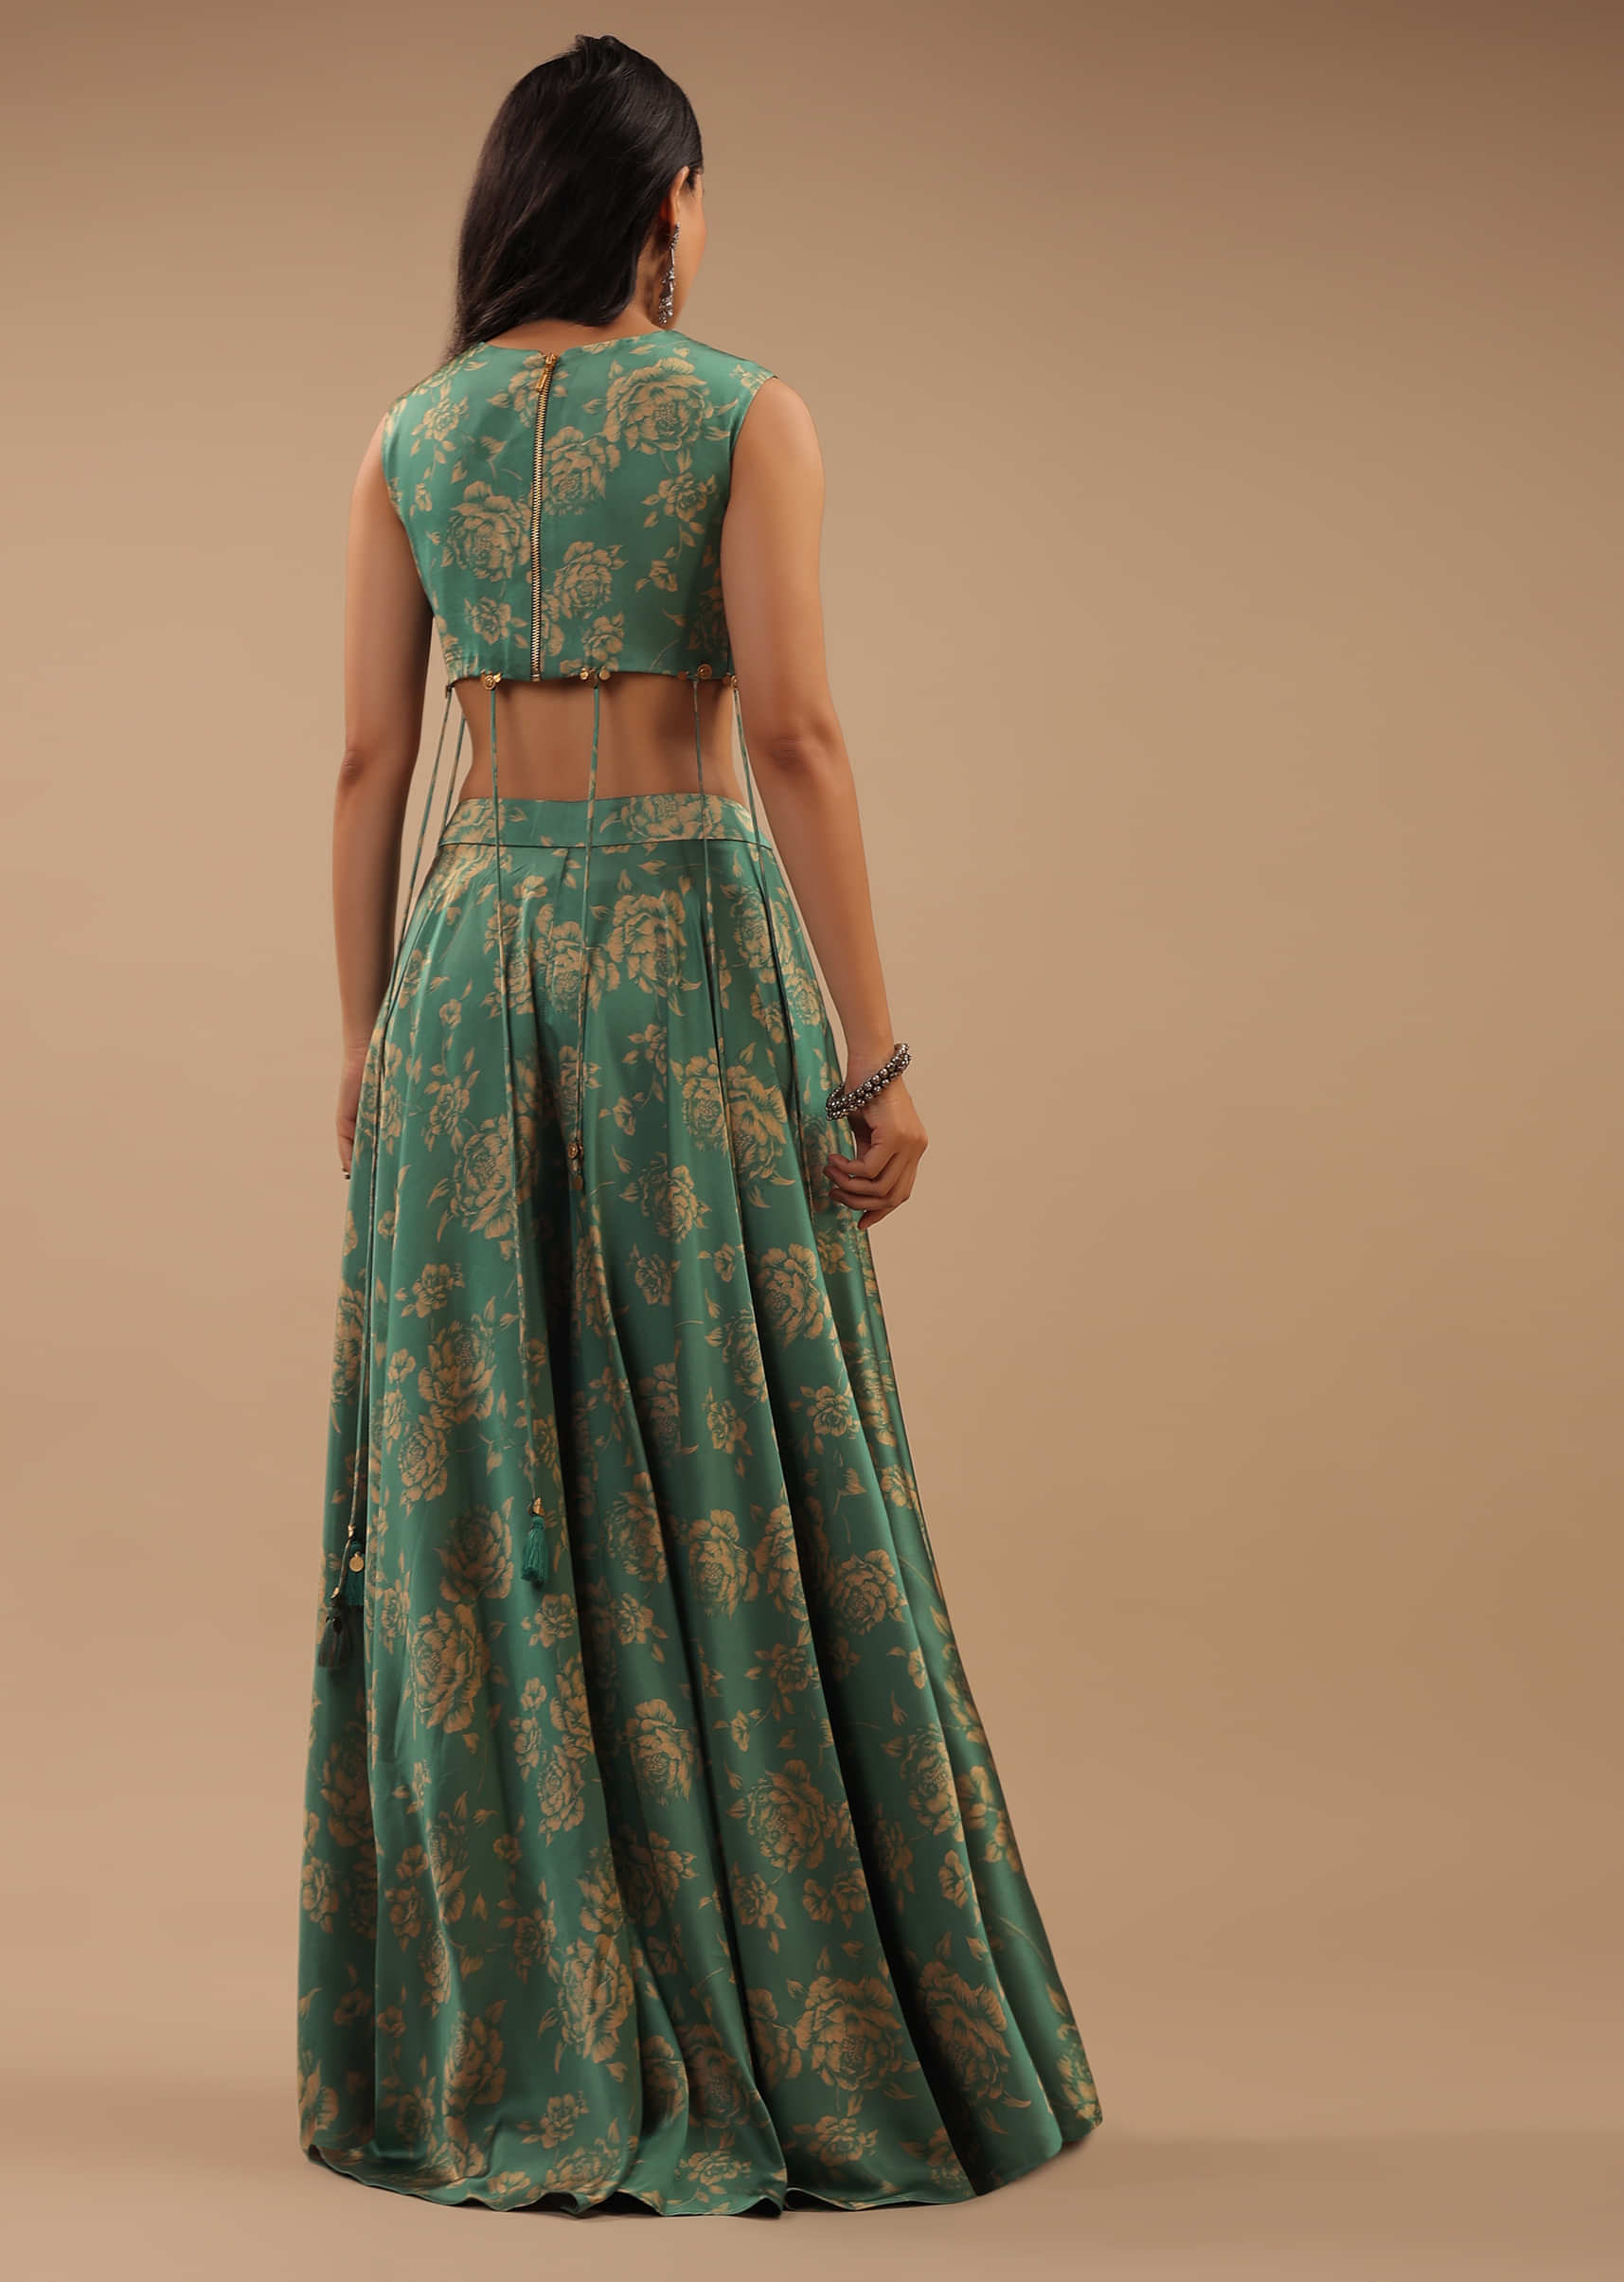 Beryl Green Satin Blouse And Palazzo Pants With Floral Print And Asymmetric Hemline